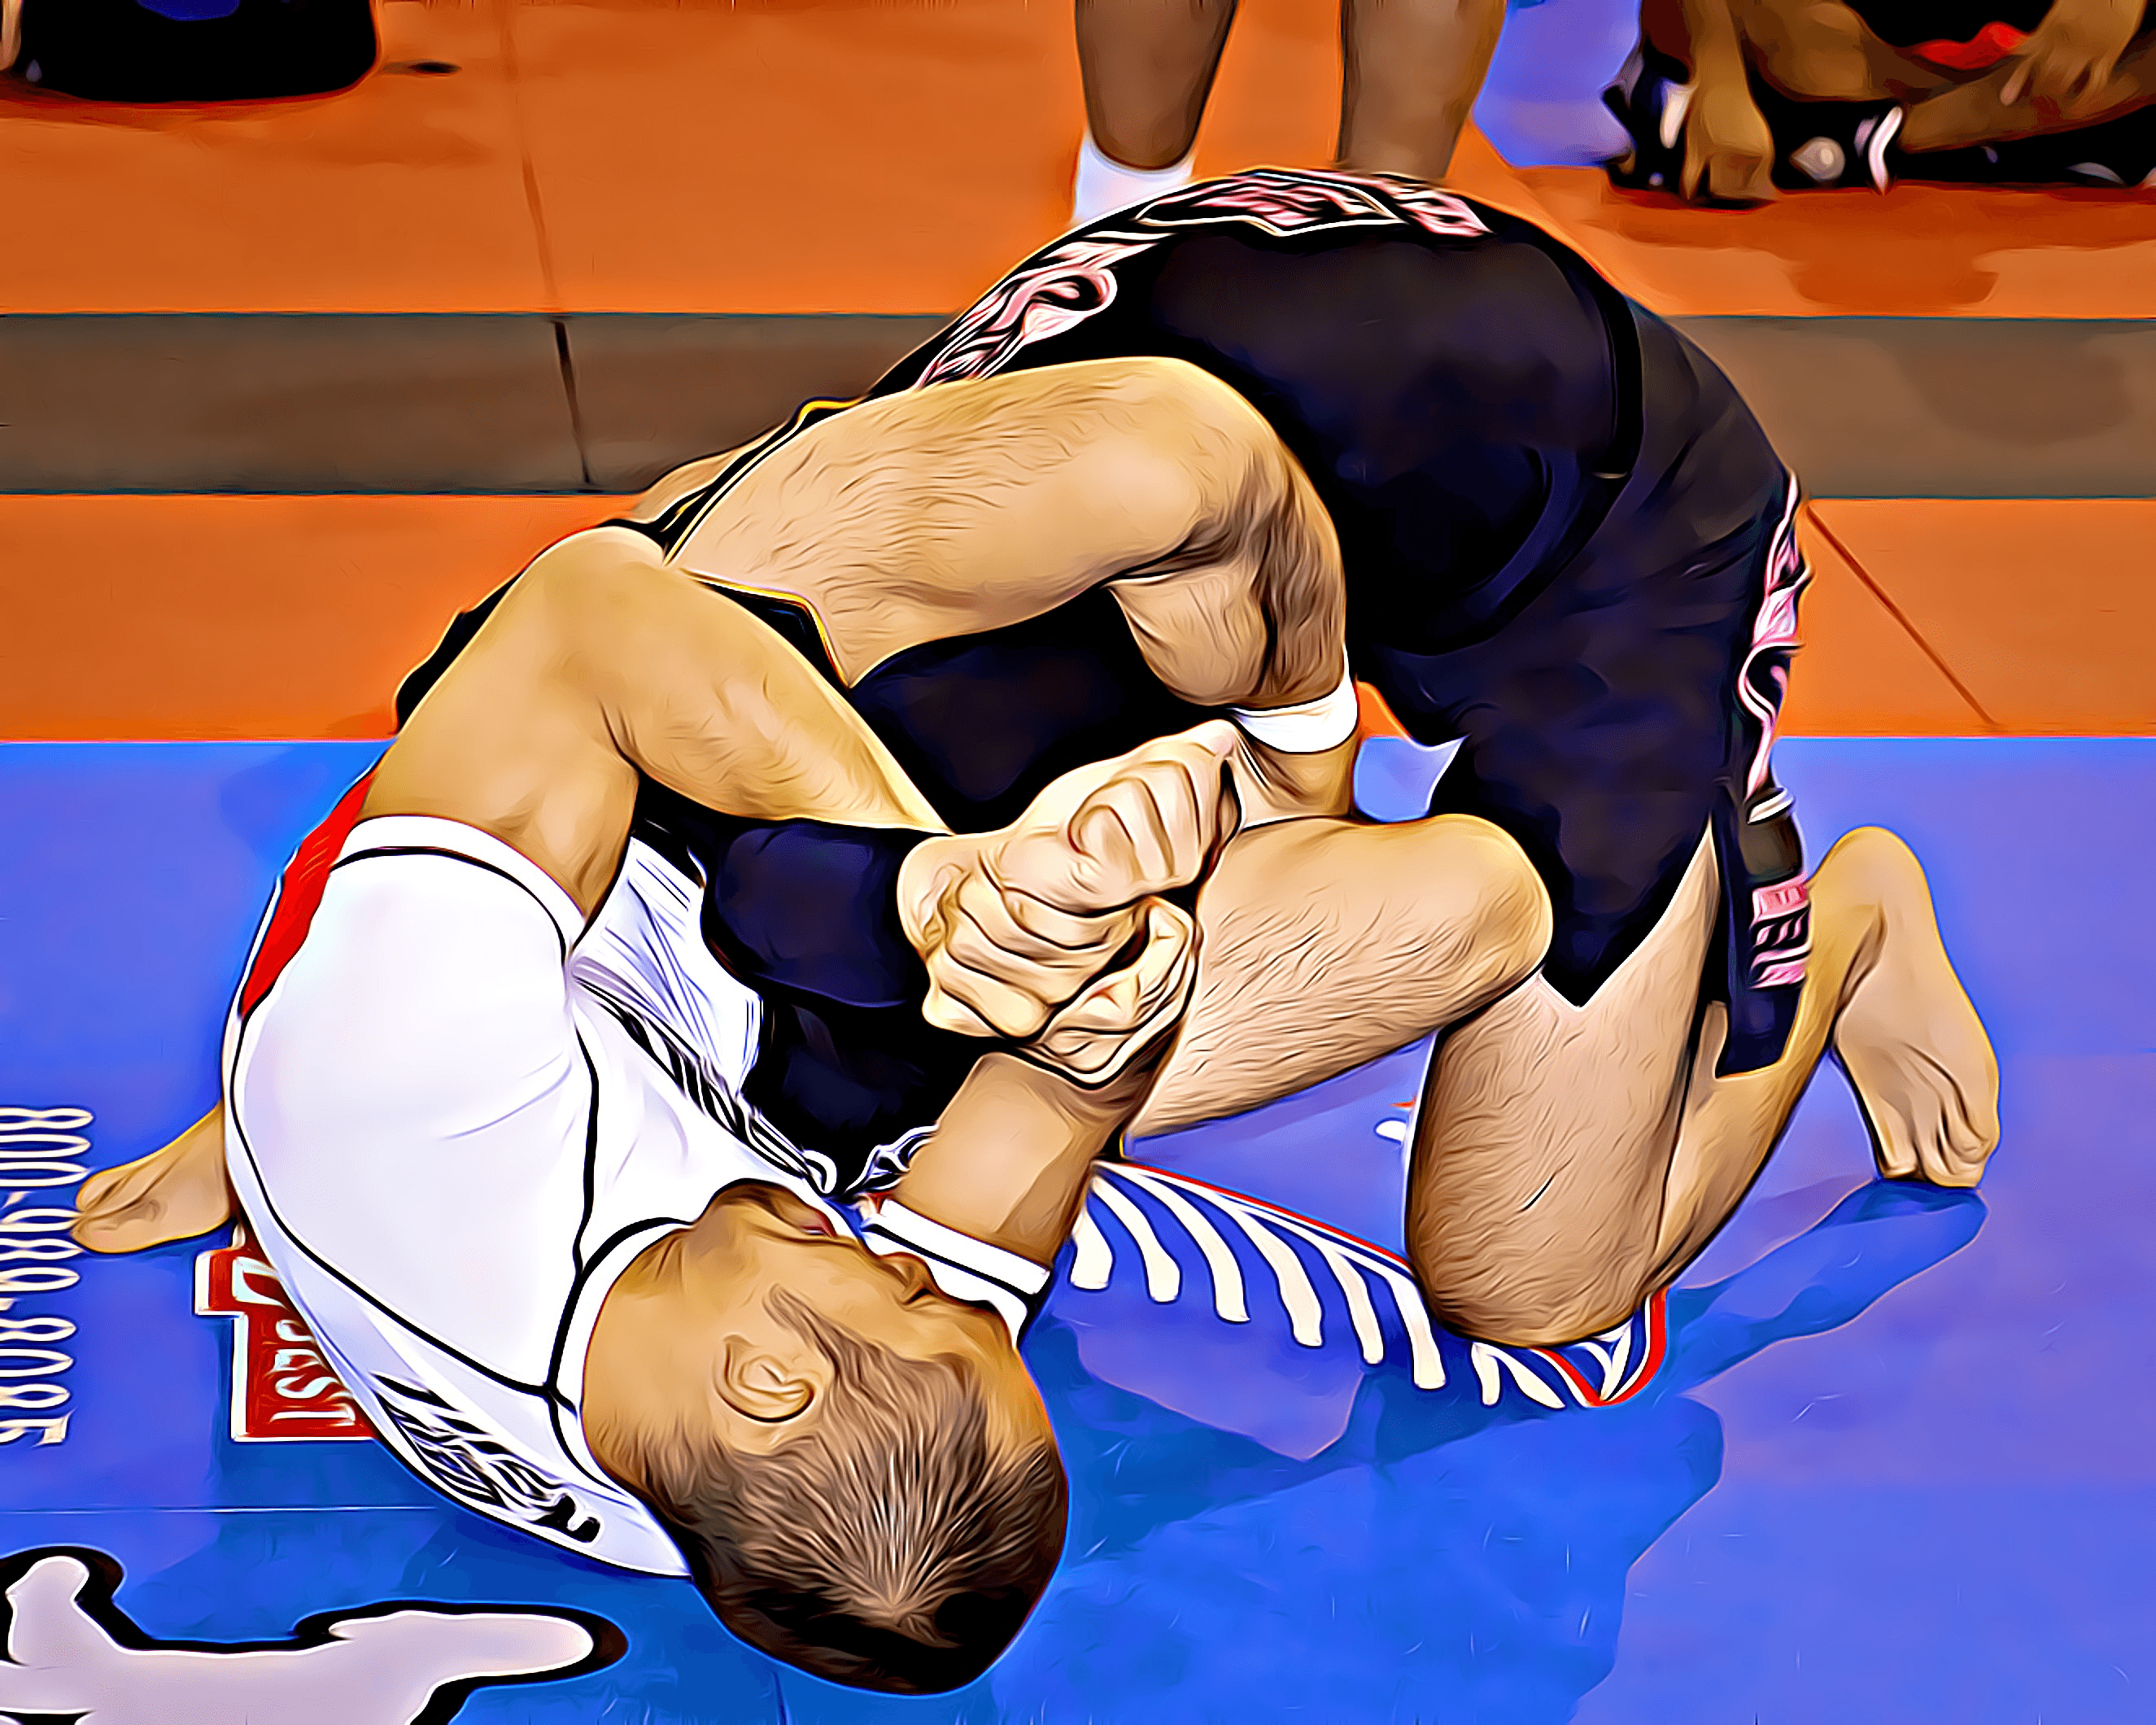 Submission Art - Rumina Sato vs. Ulysses Gomez at Grapplers Quest UFC Fan Expo